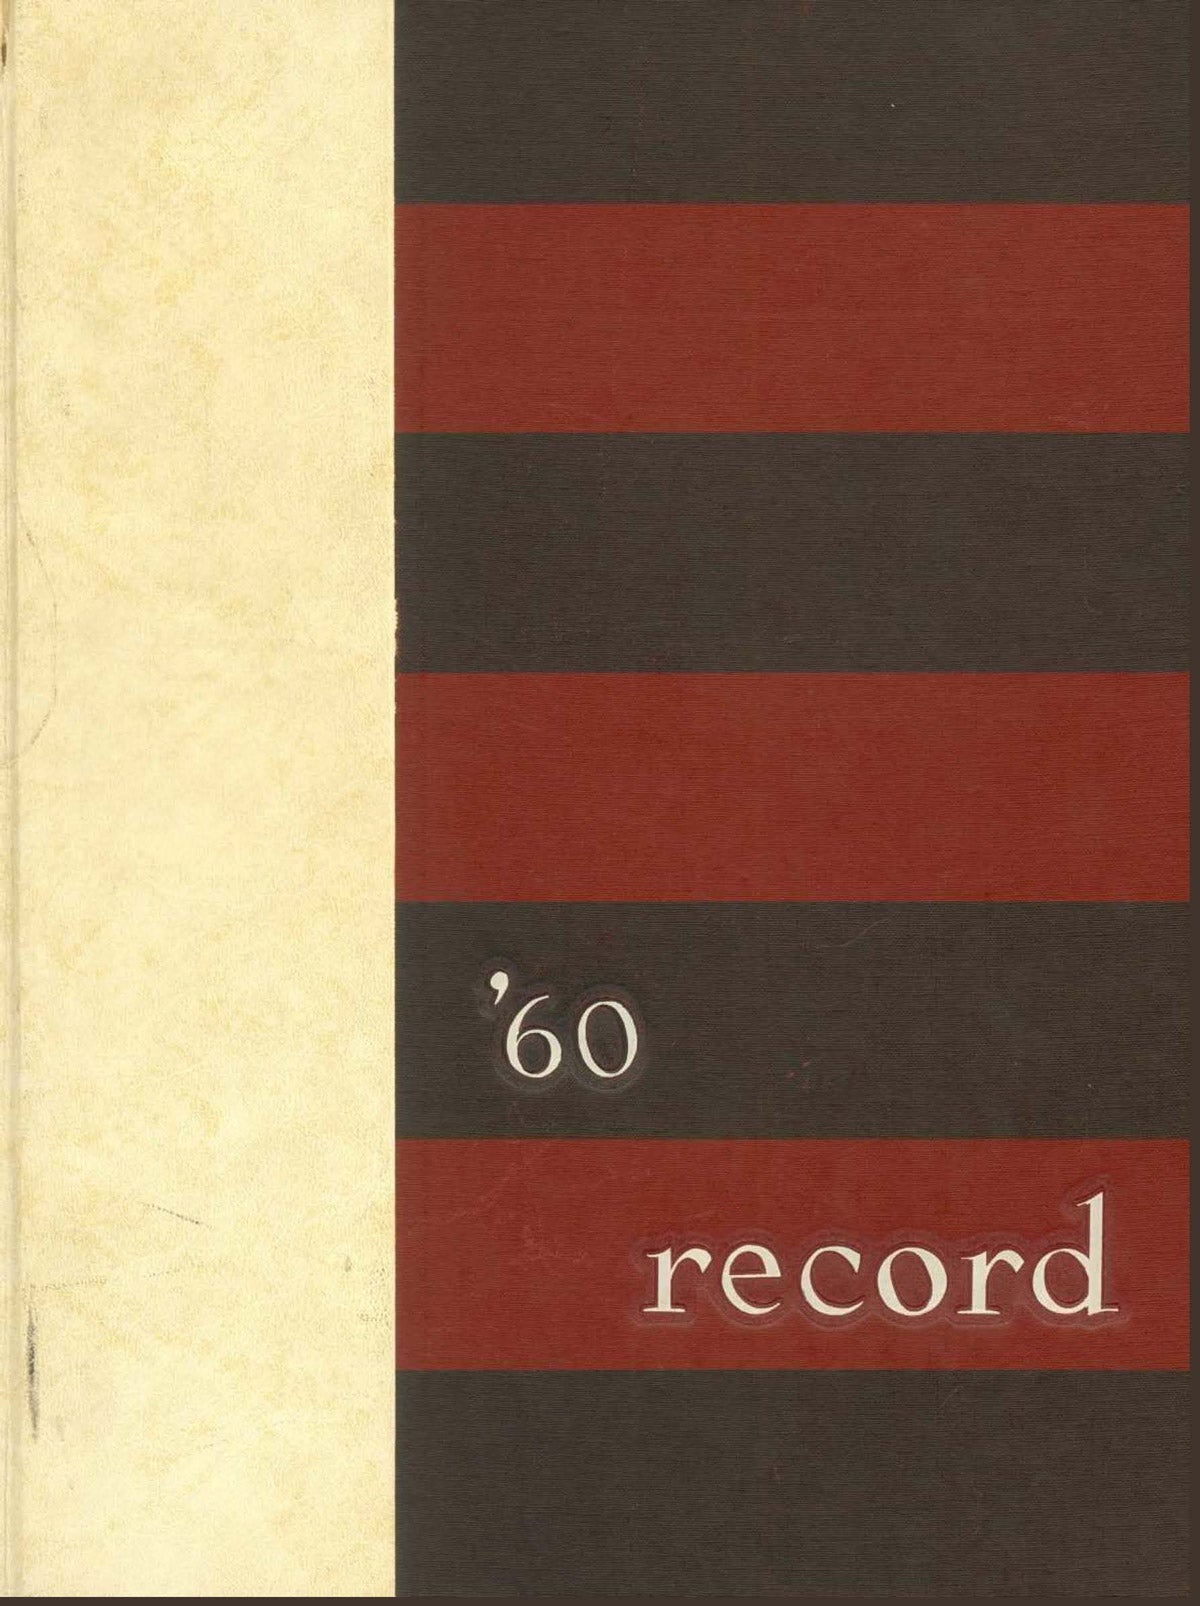 The Record, cover, 1960